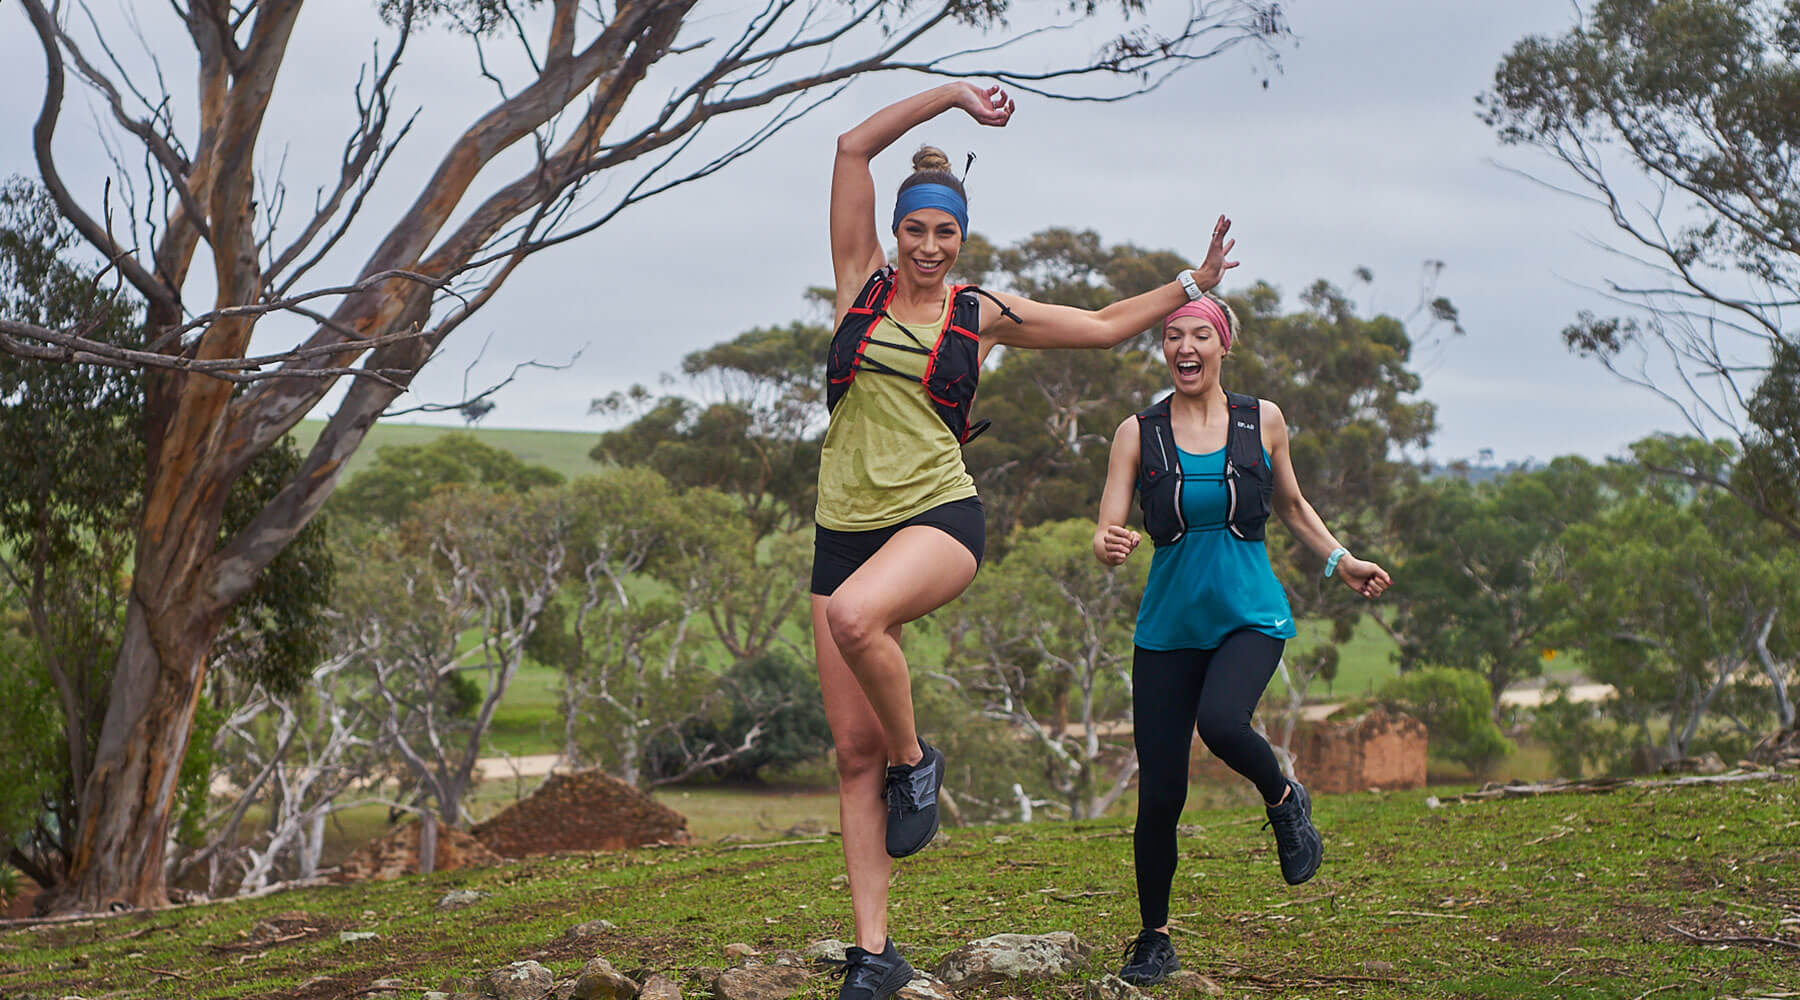 Two women trail running wearing light weight sports headbands in blue and red